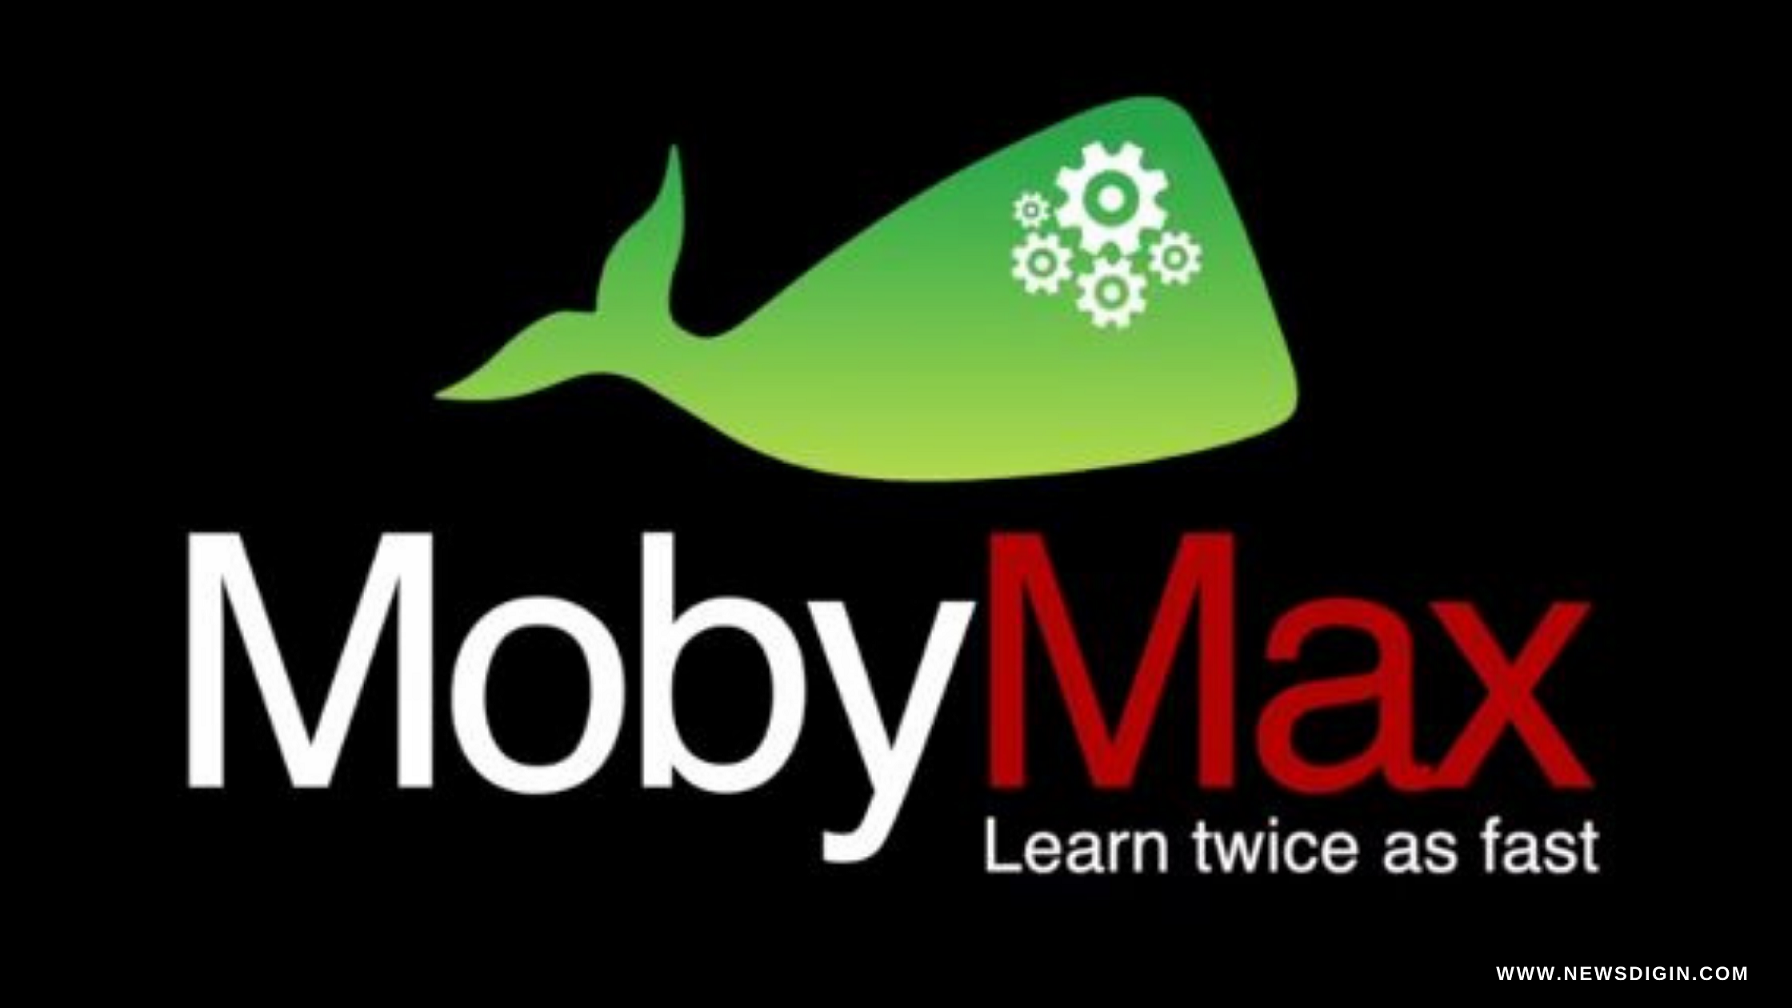 Moby Max Tablets